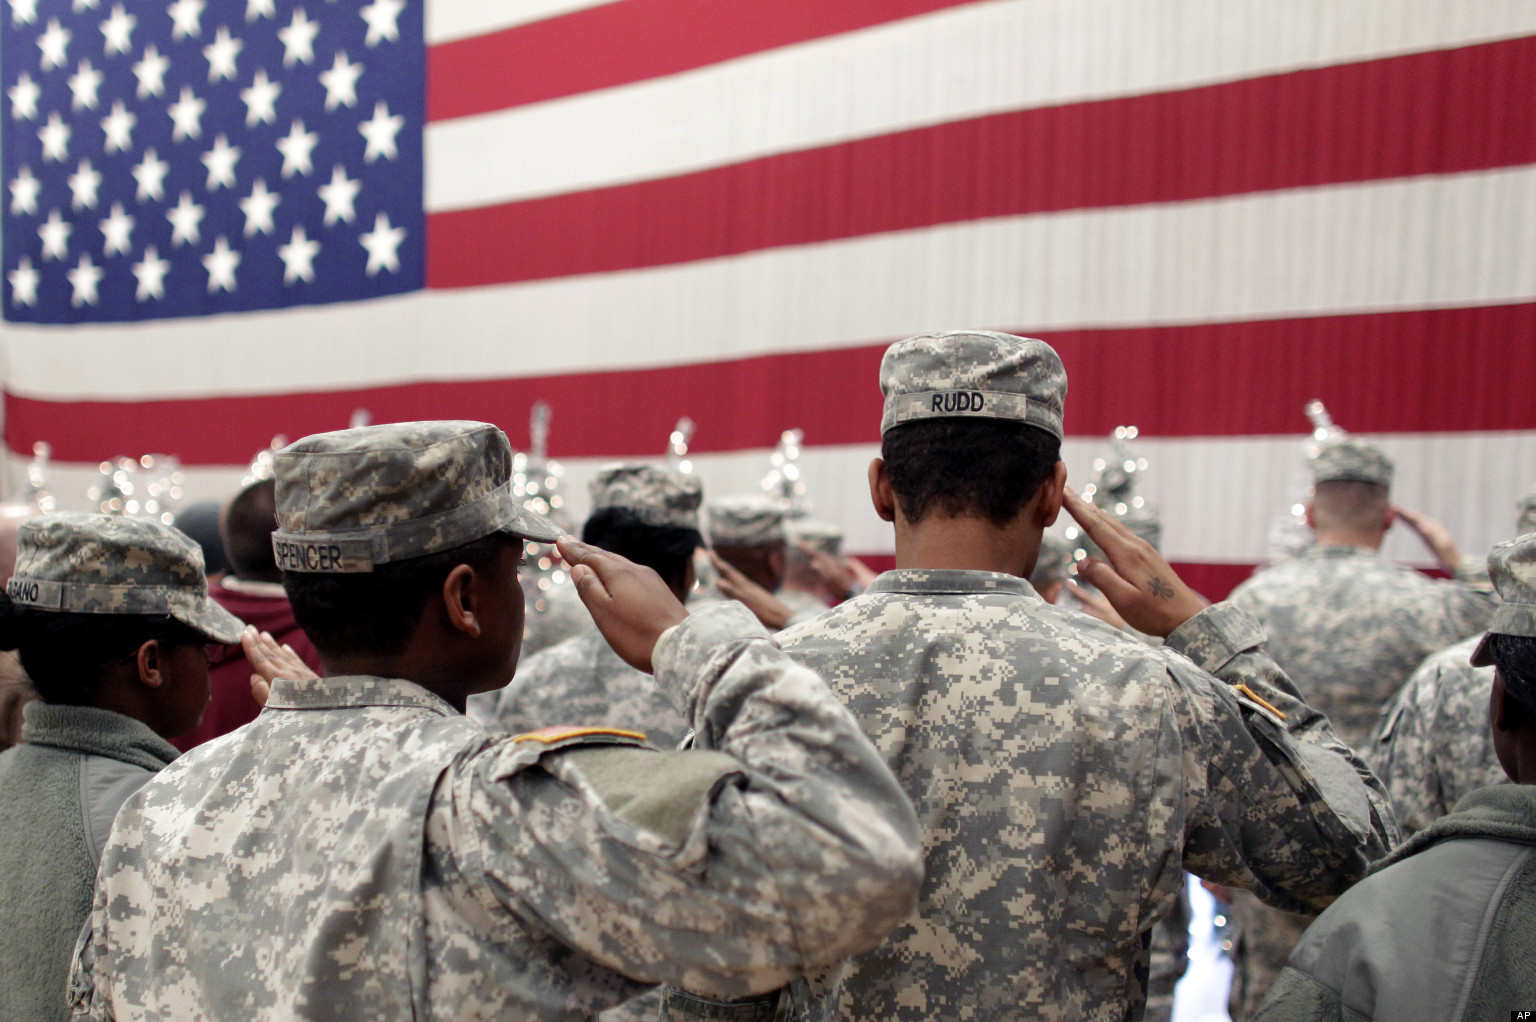 The vast divide between America and its military